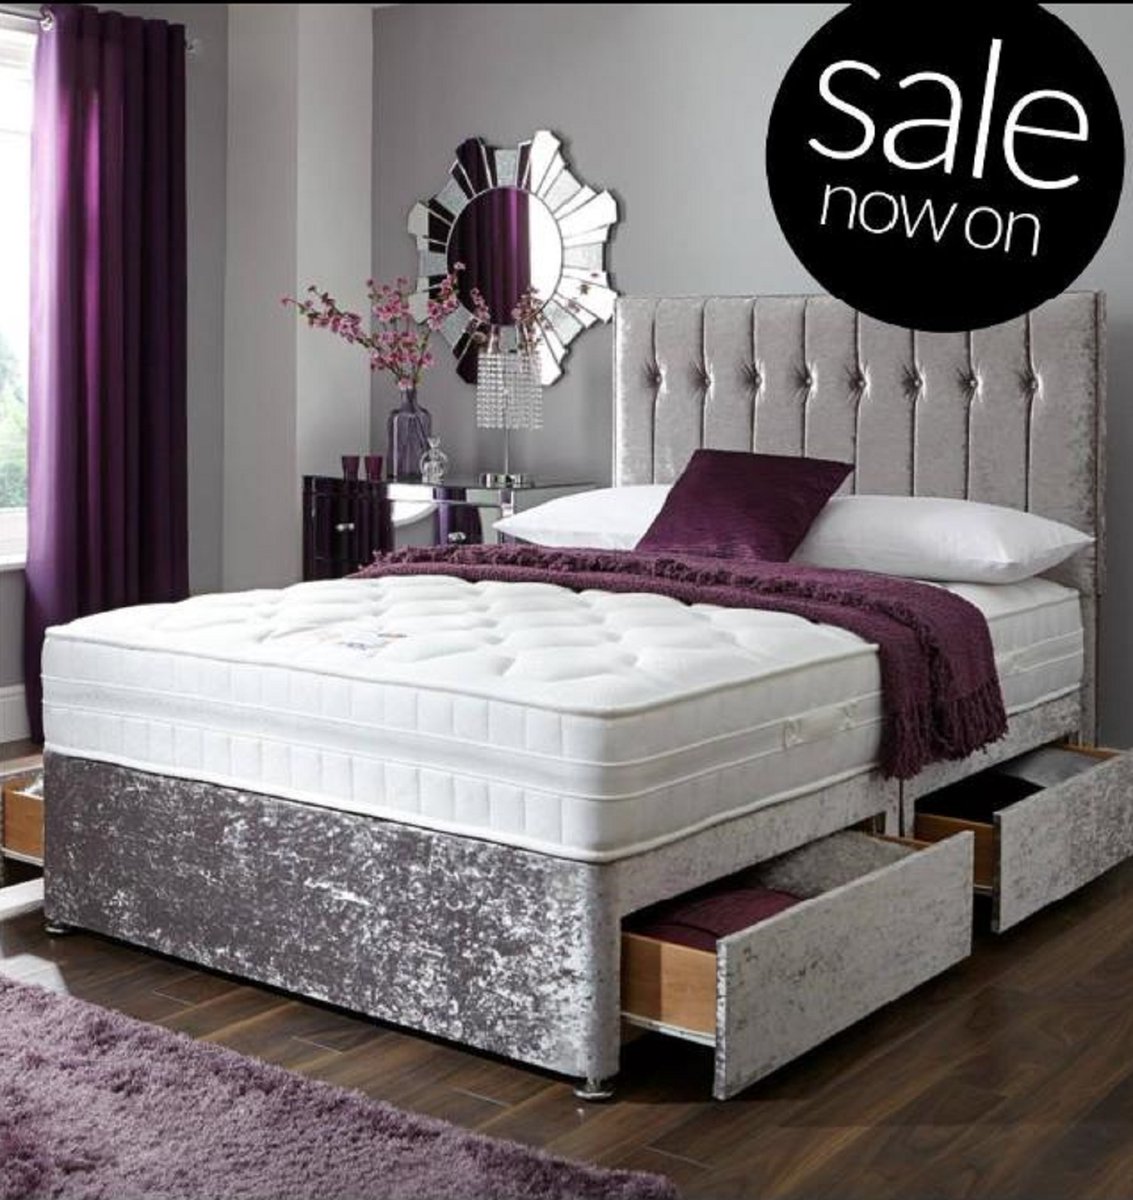 Bed lovers get that Friday feeling! Just because it's a bank holiday as well as Eid, means all of you, our wonderful customers can get 5% off any purchase! To claim quote BH-EID-5%: zcu.io/2RPl. Hurry sale ends midnight Monday!#bedroomdecor #FridayFeeling  #sale